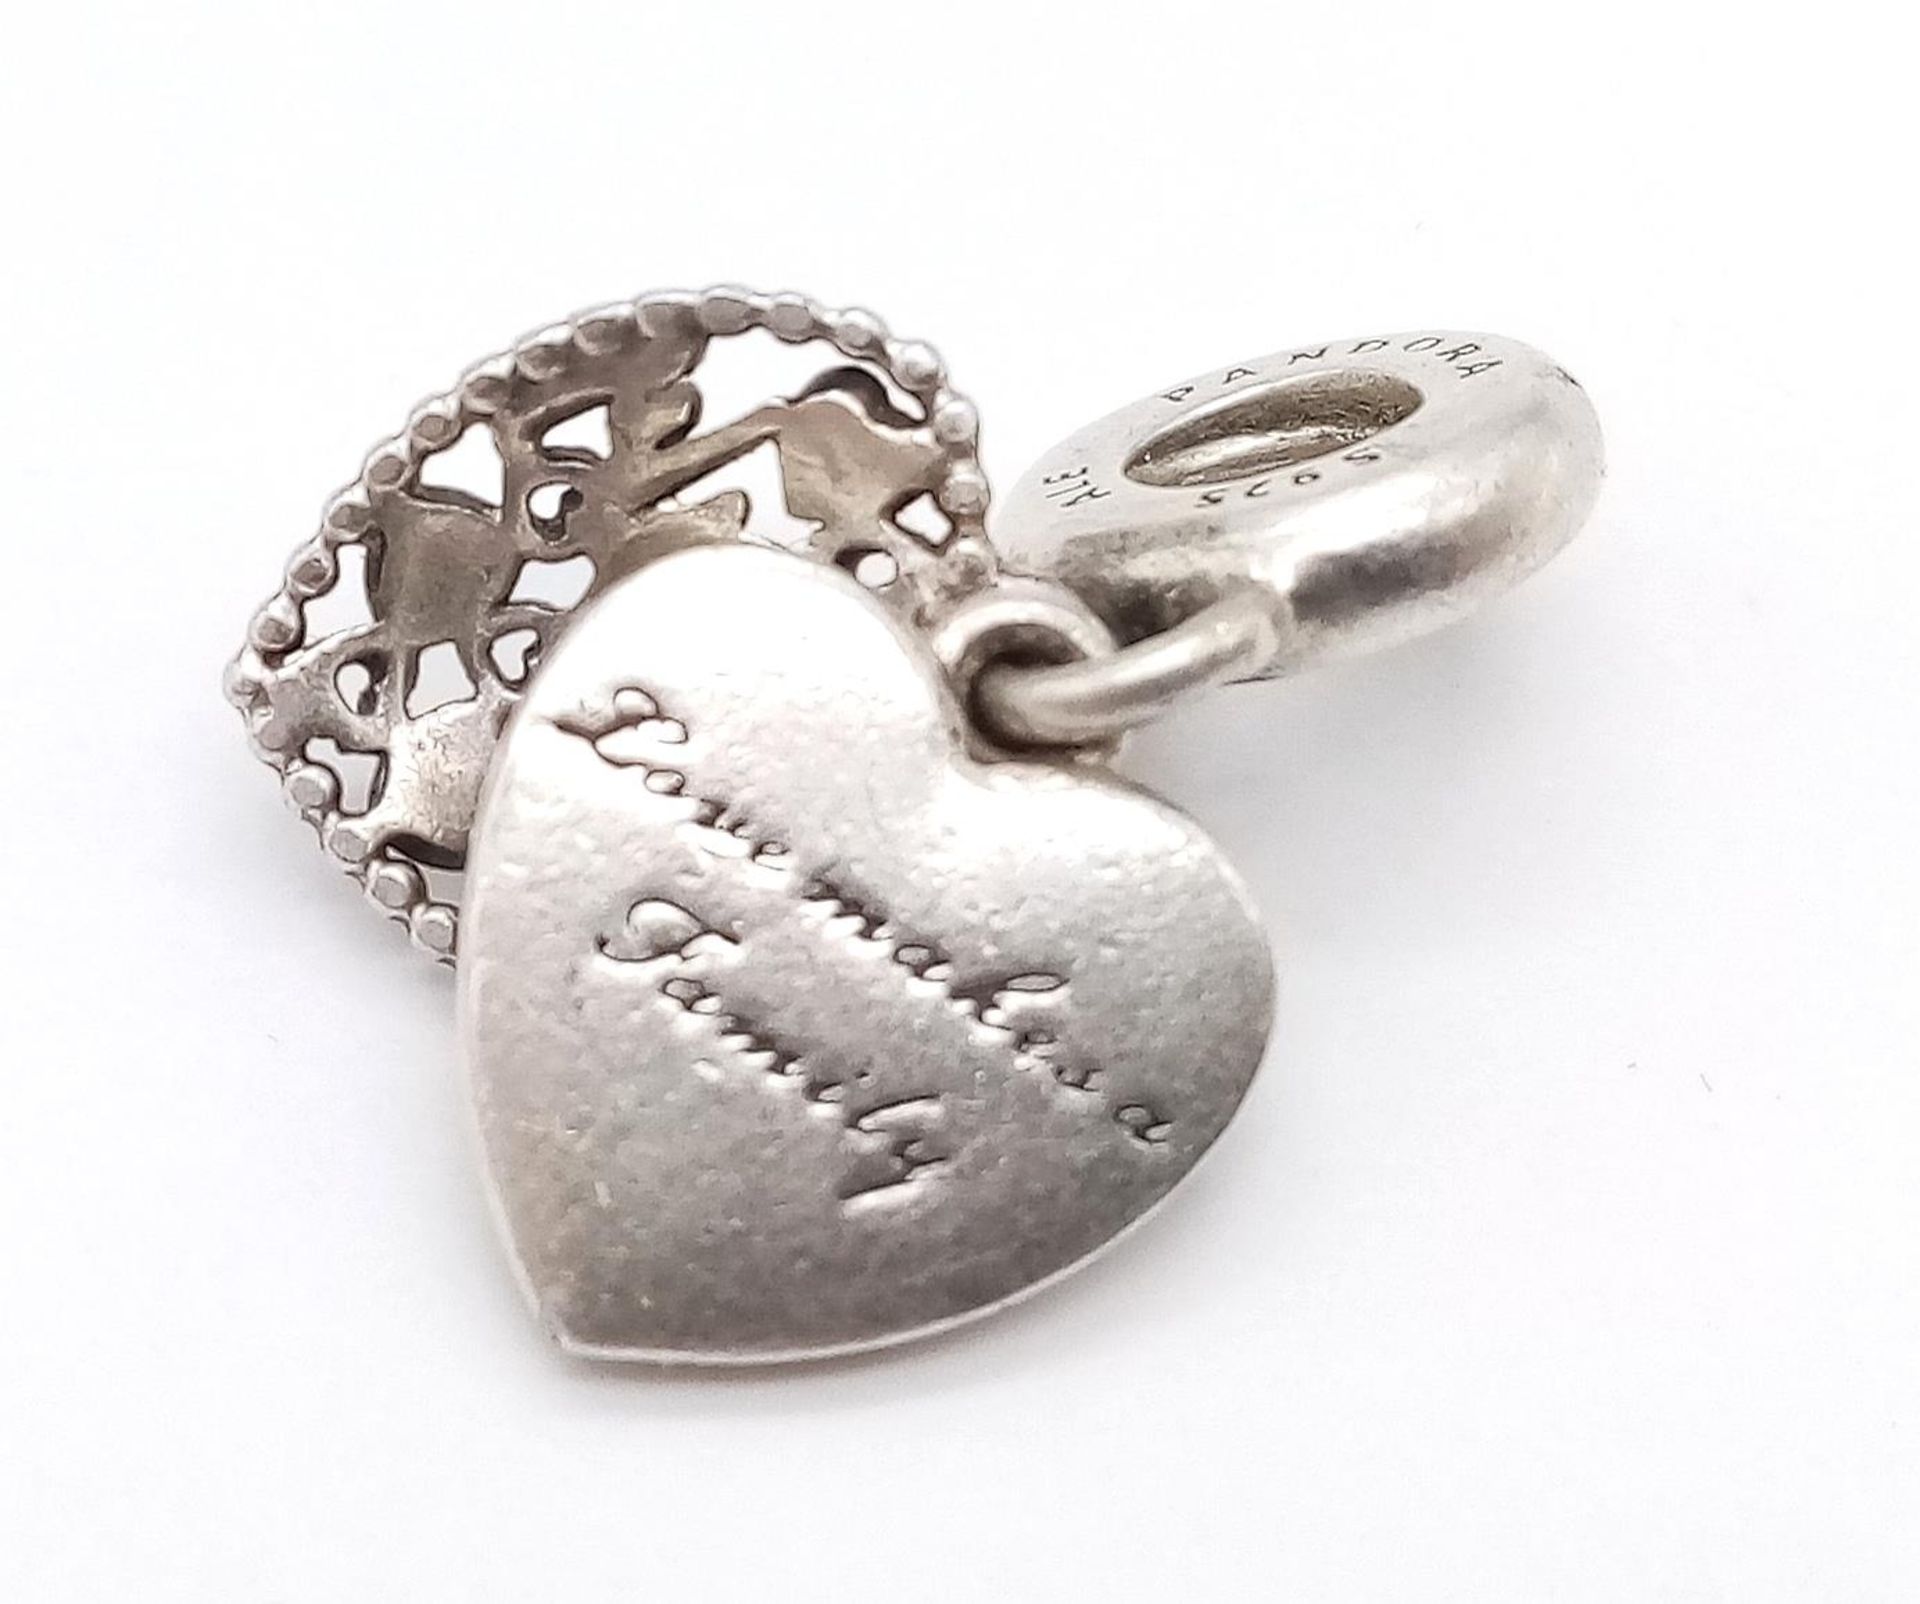 2 x Pandora Sterling Silver Heart Charms - one says 'Family' and the other says 'First My Mother, - Image 6 of 7